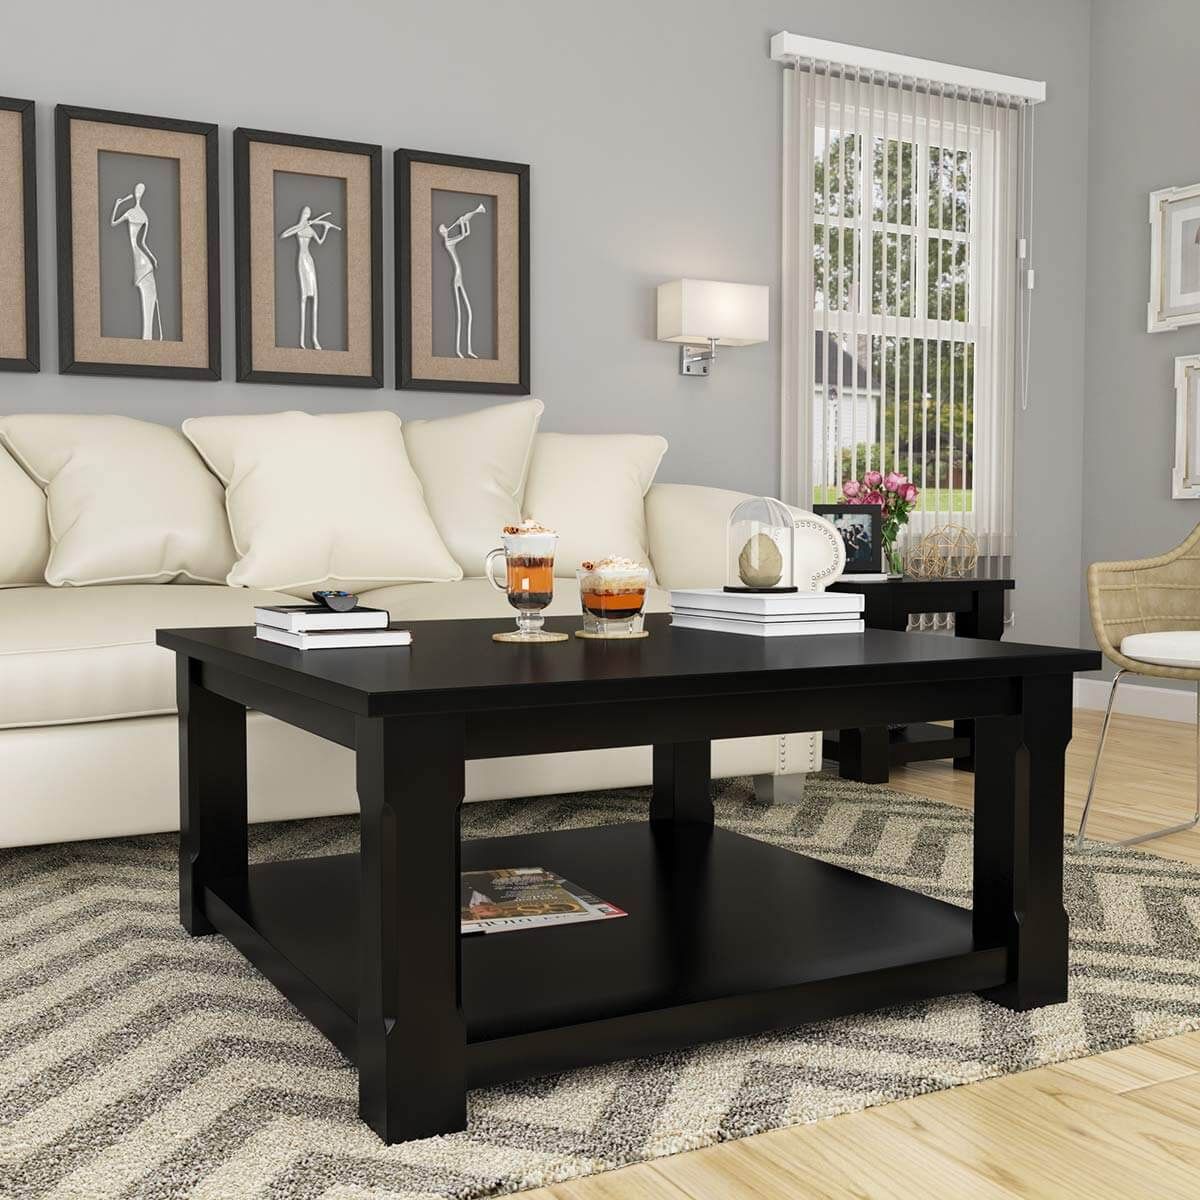 Black Wood Square Coffee Table – Brimson Contemporary Style Solid Wood With Regard To Wood Coffee Tables With 2 Tier Storage (View 6 of 20)